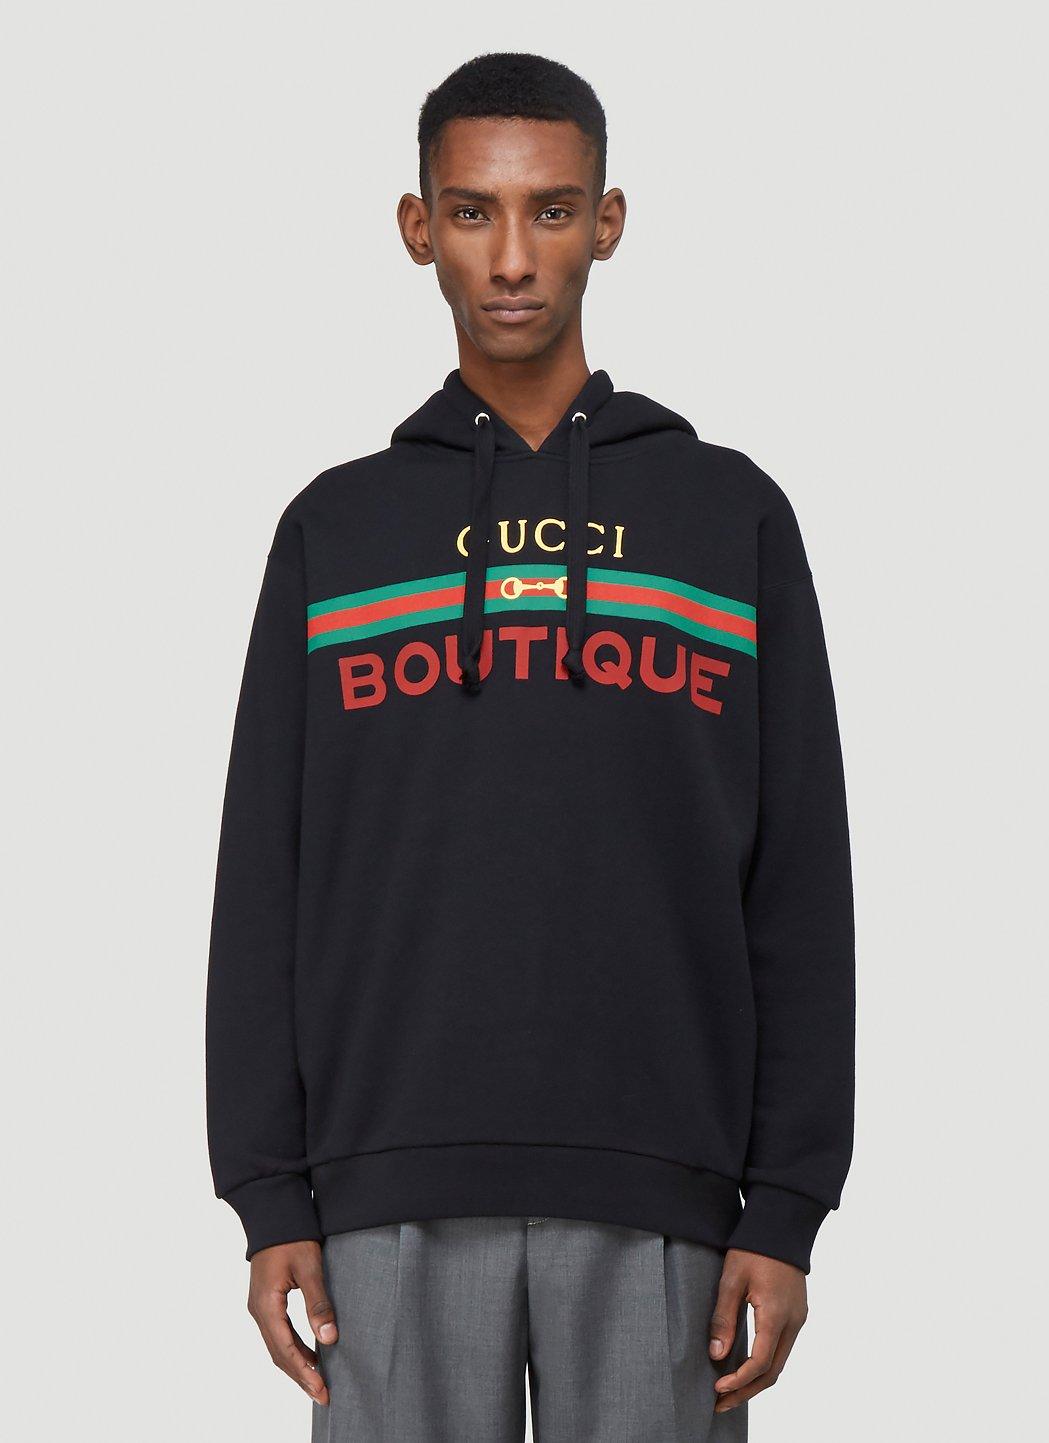 Gucci Boutique Graphic-print Cotton-jersey Hoody in Black for Men 